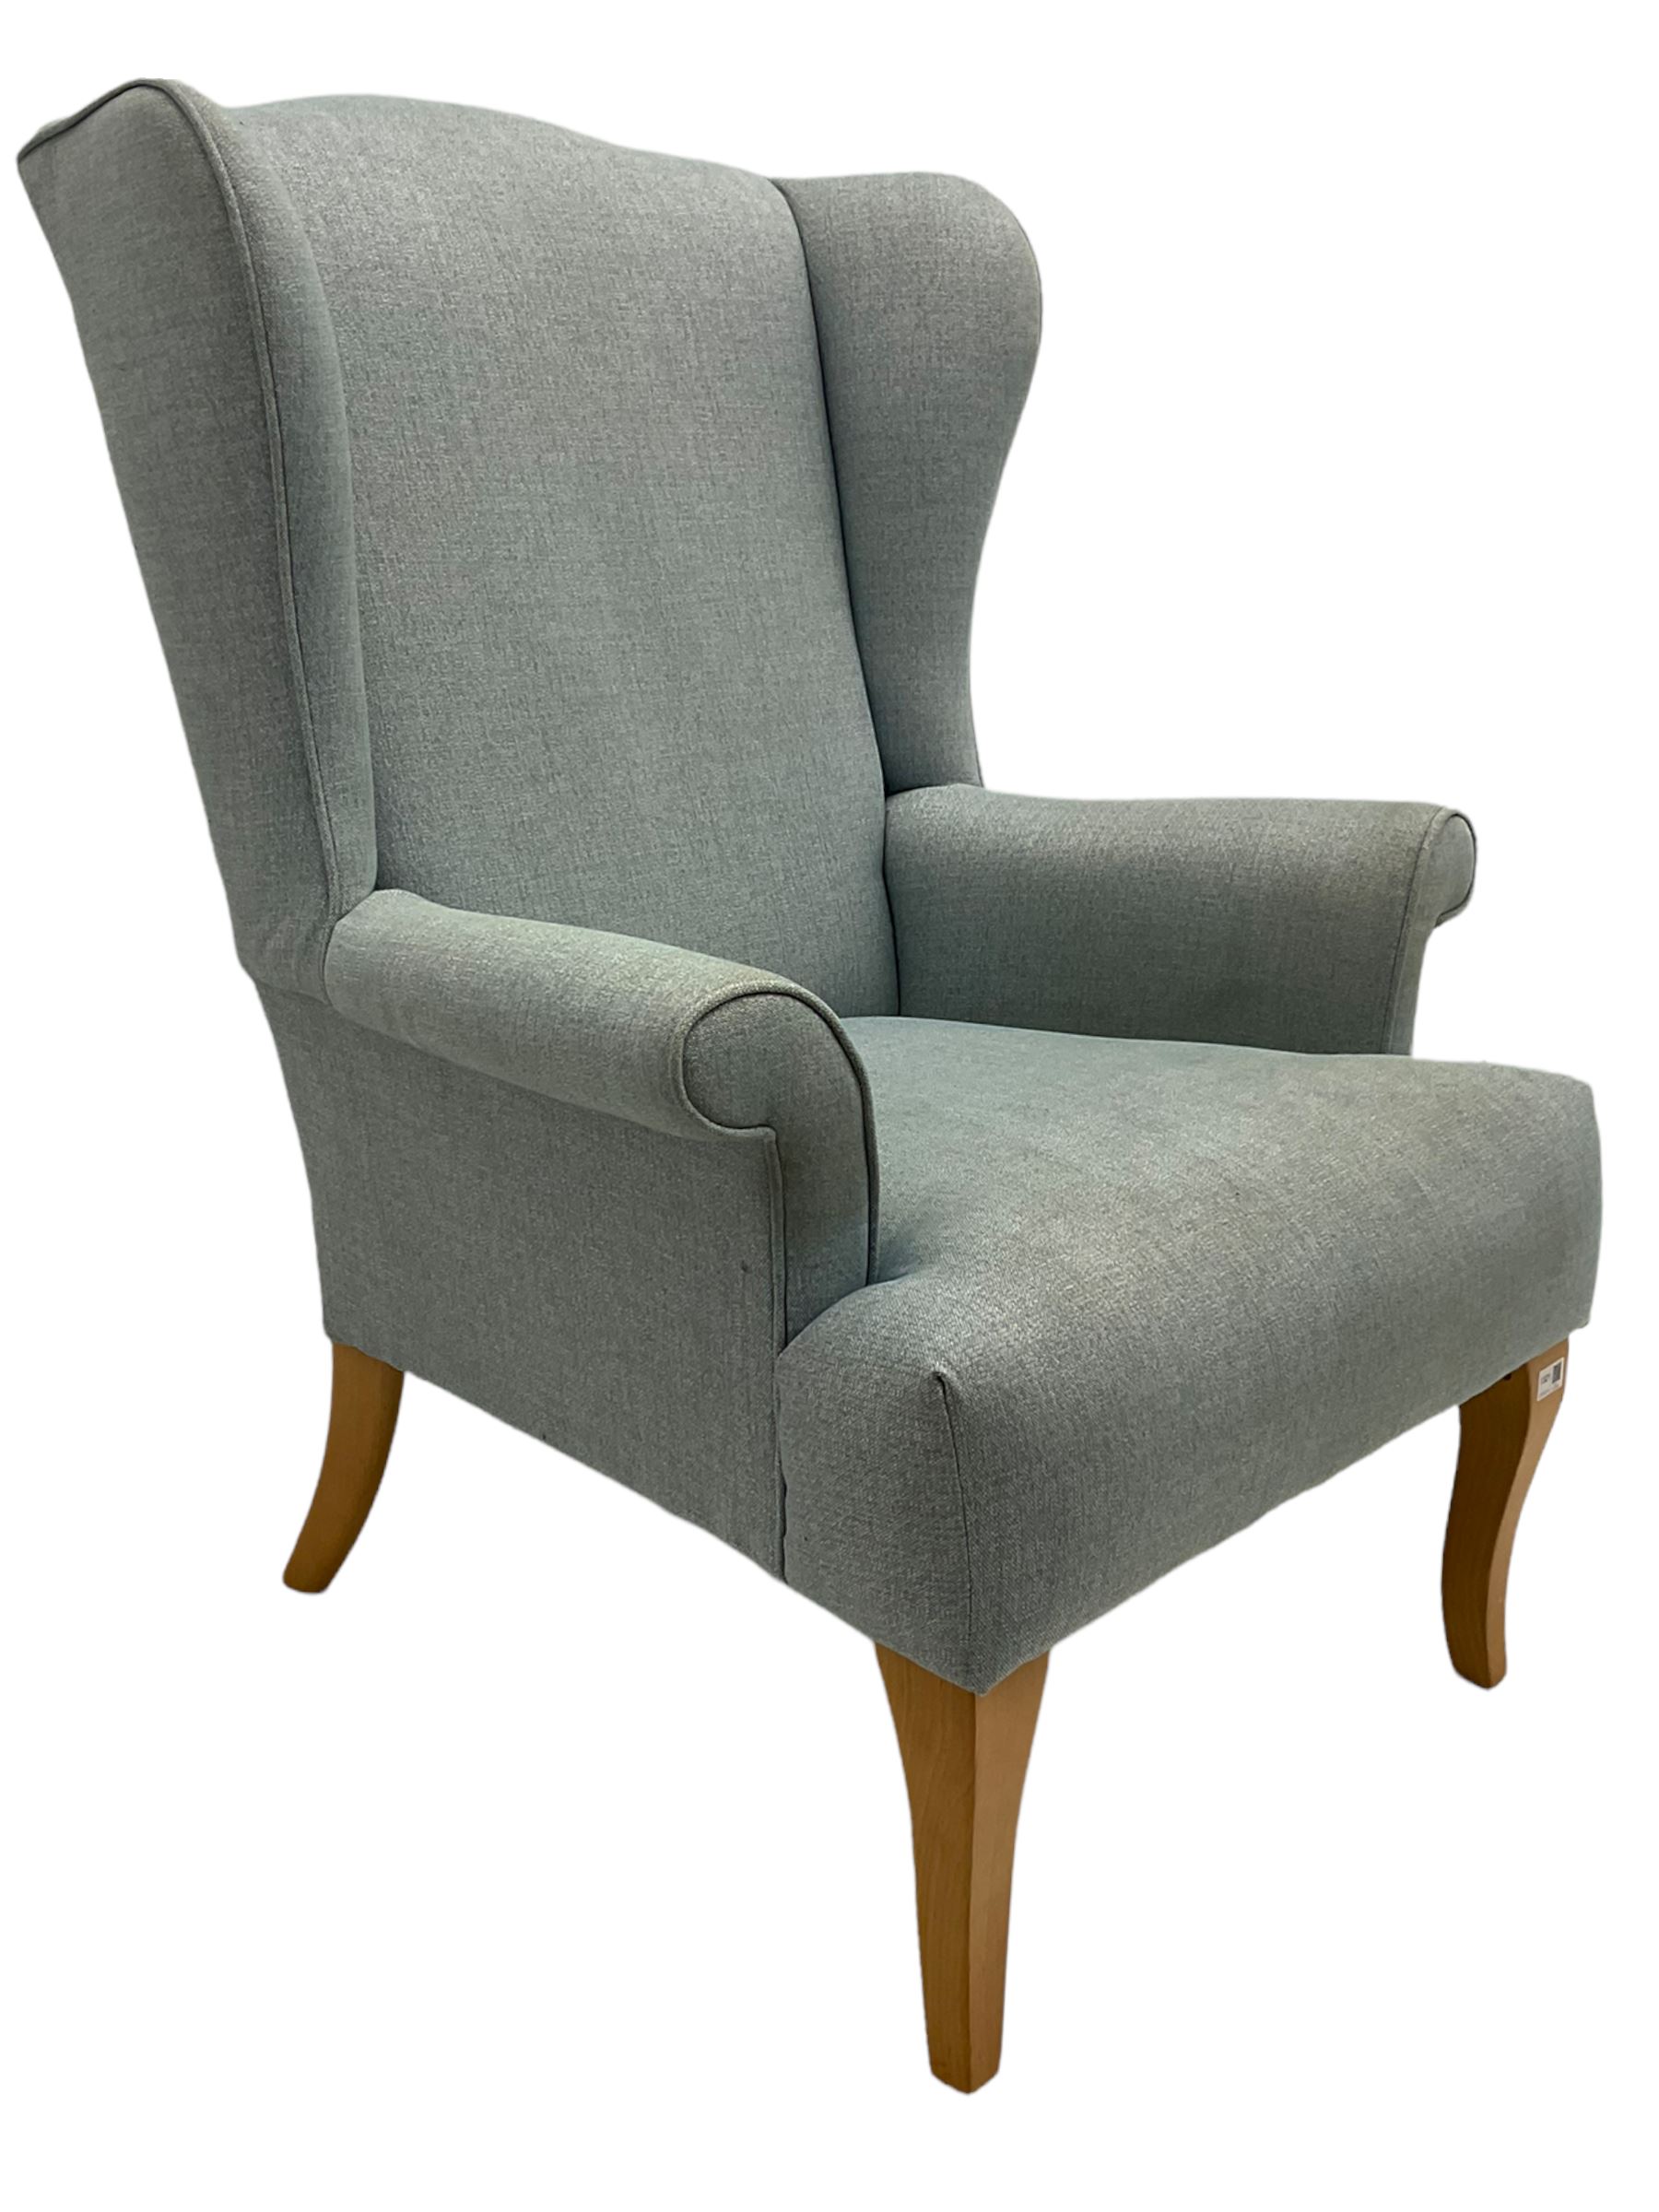 John Lewis high wing back armchair upholstered in denim cover